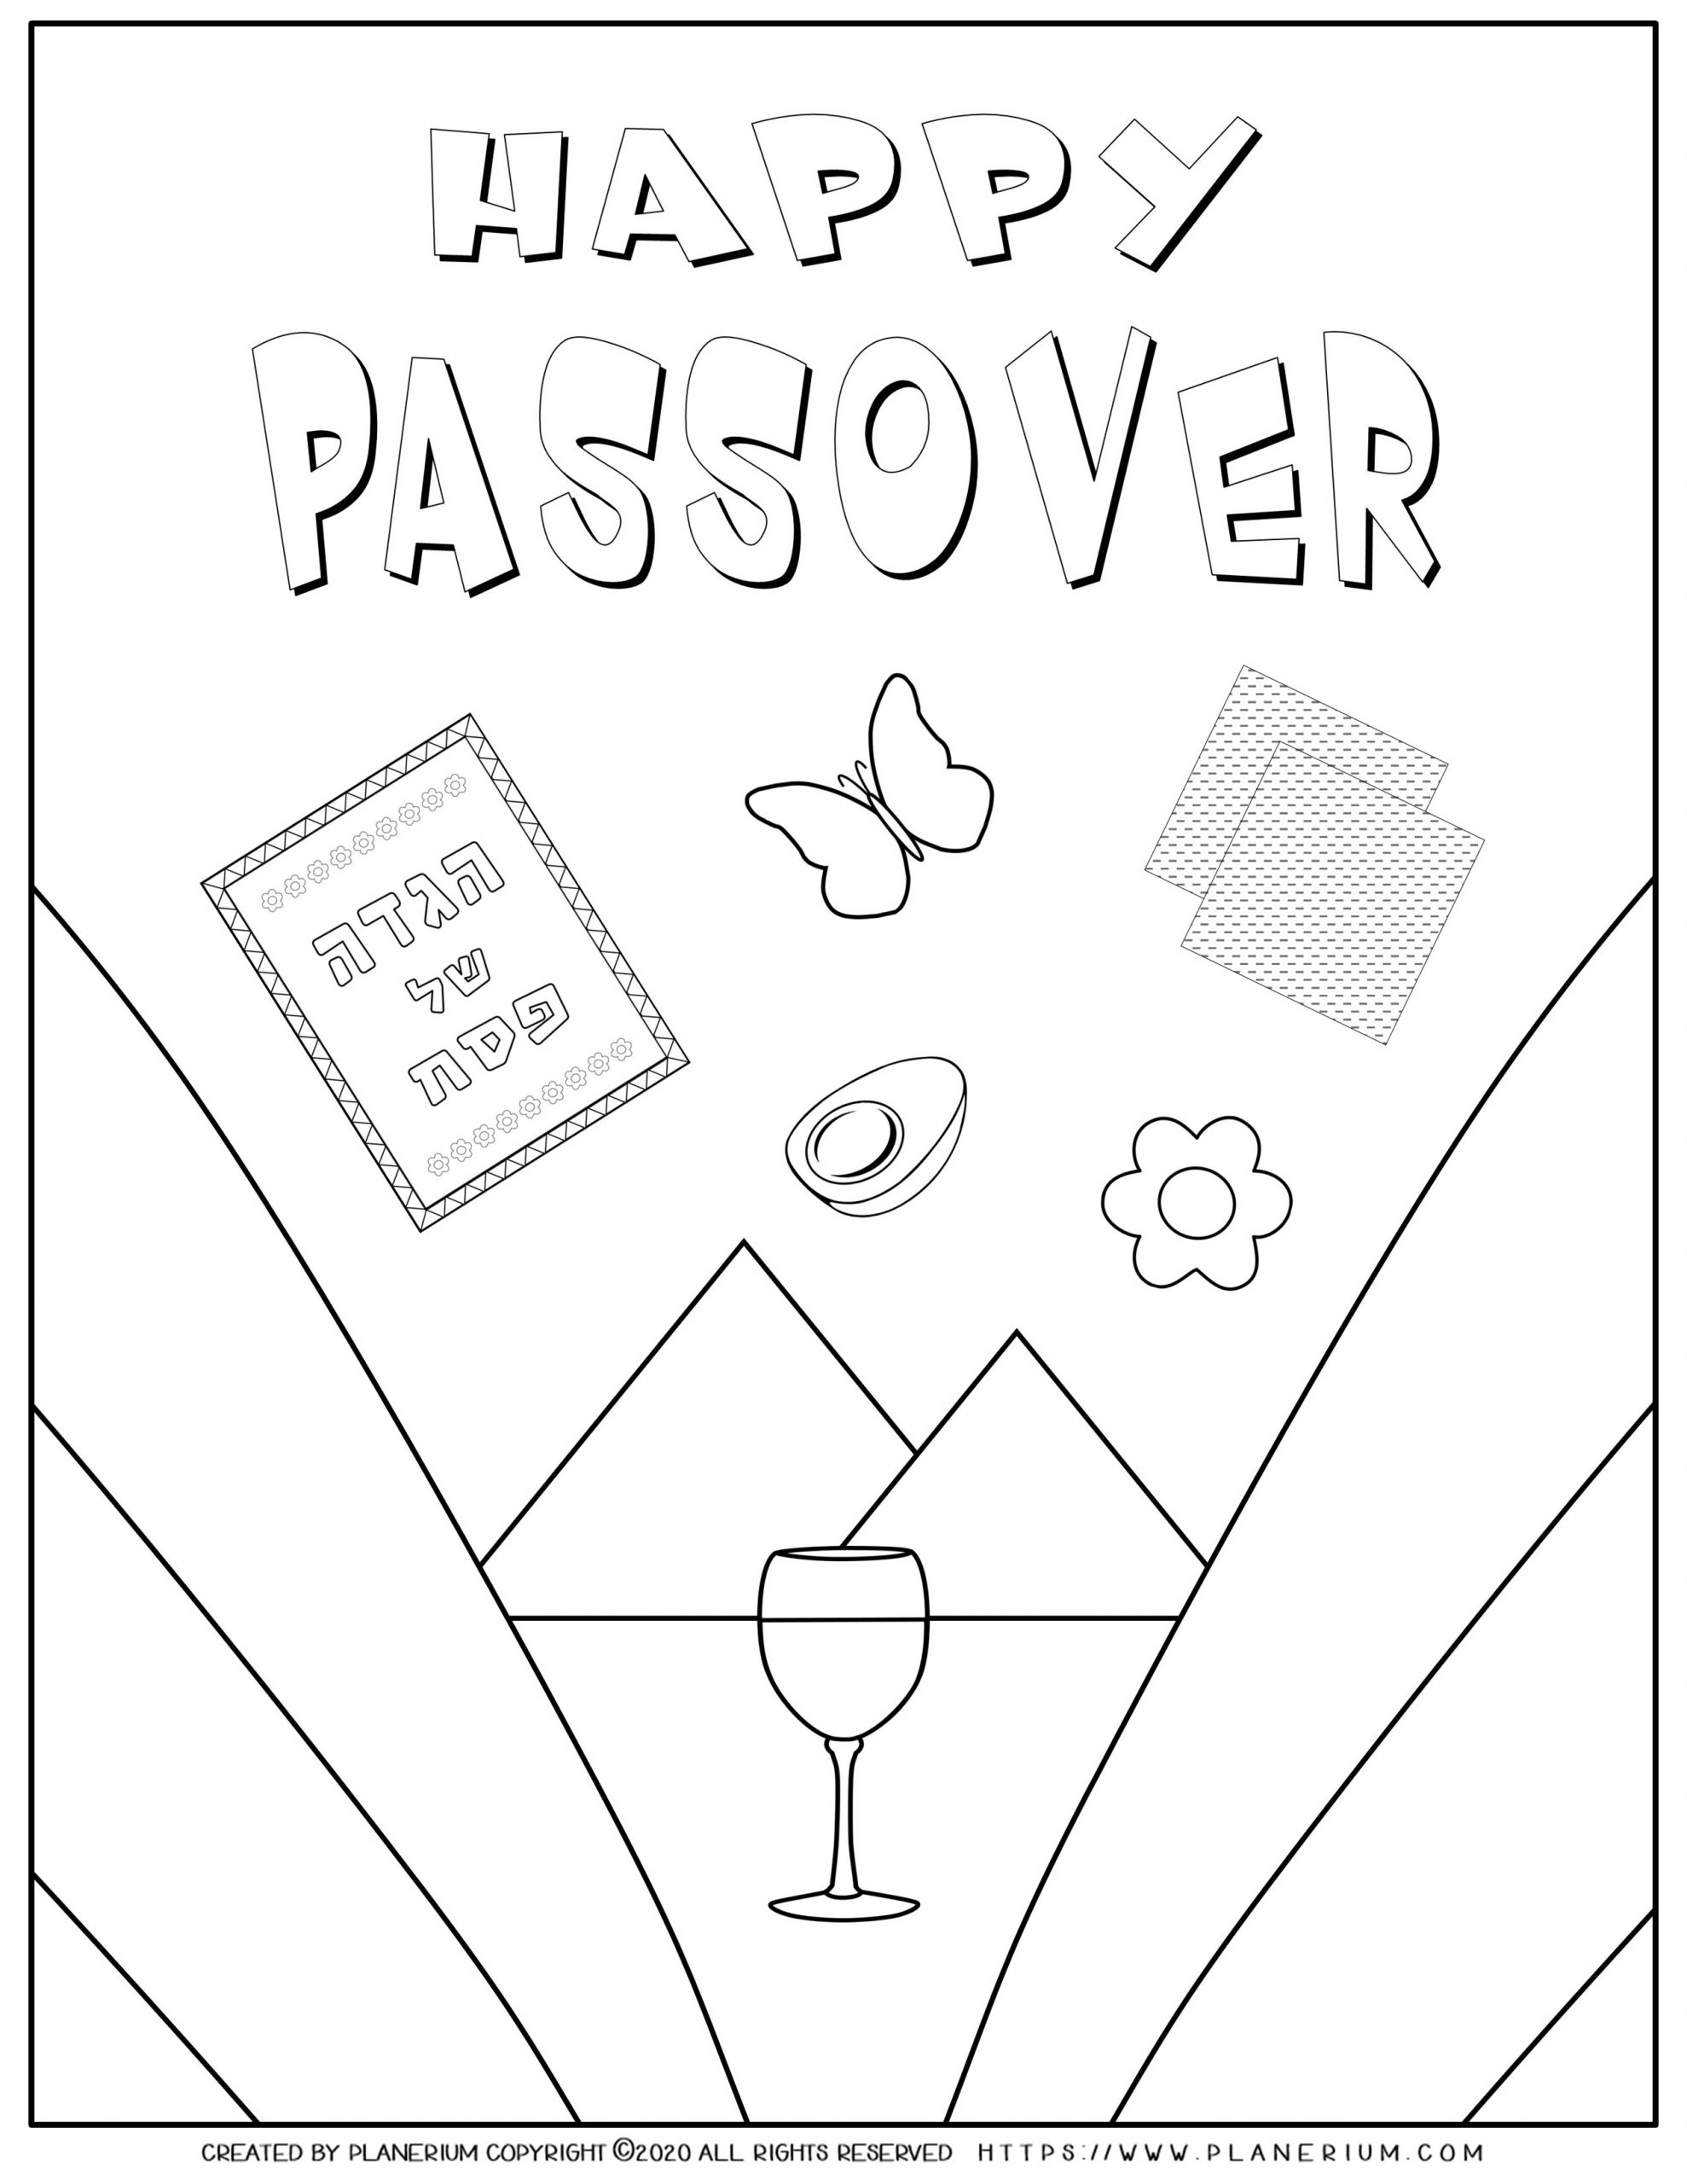 passover-2020-coloring-pages-and-worksheets-planerium